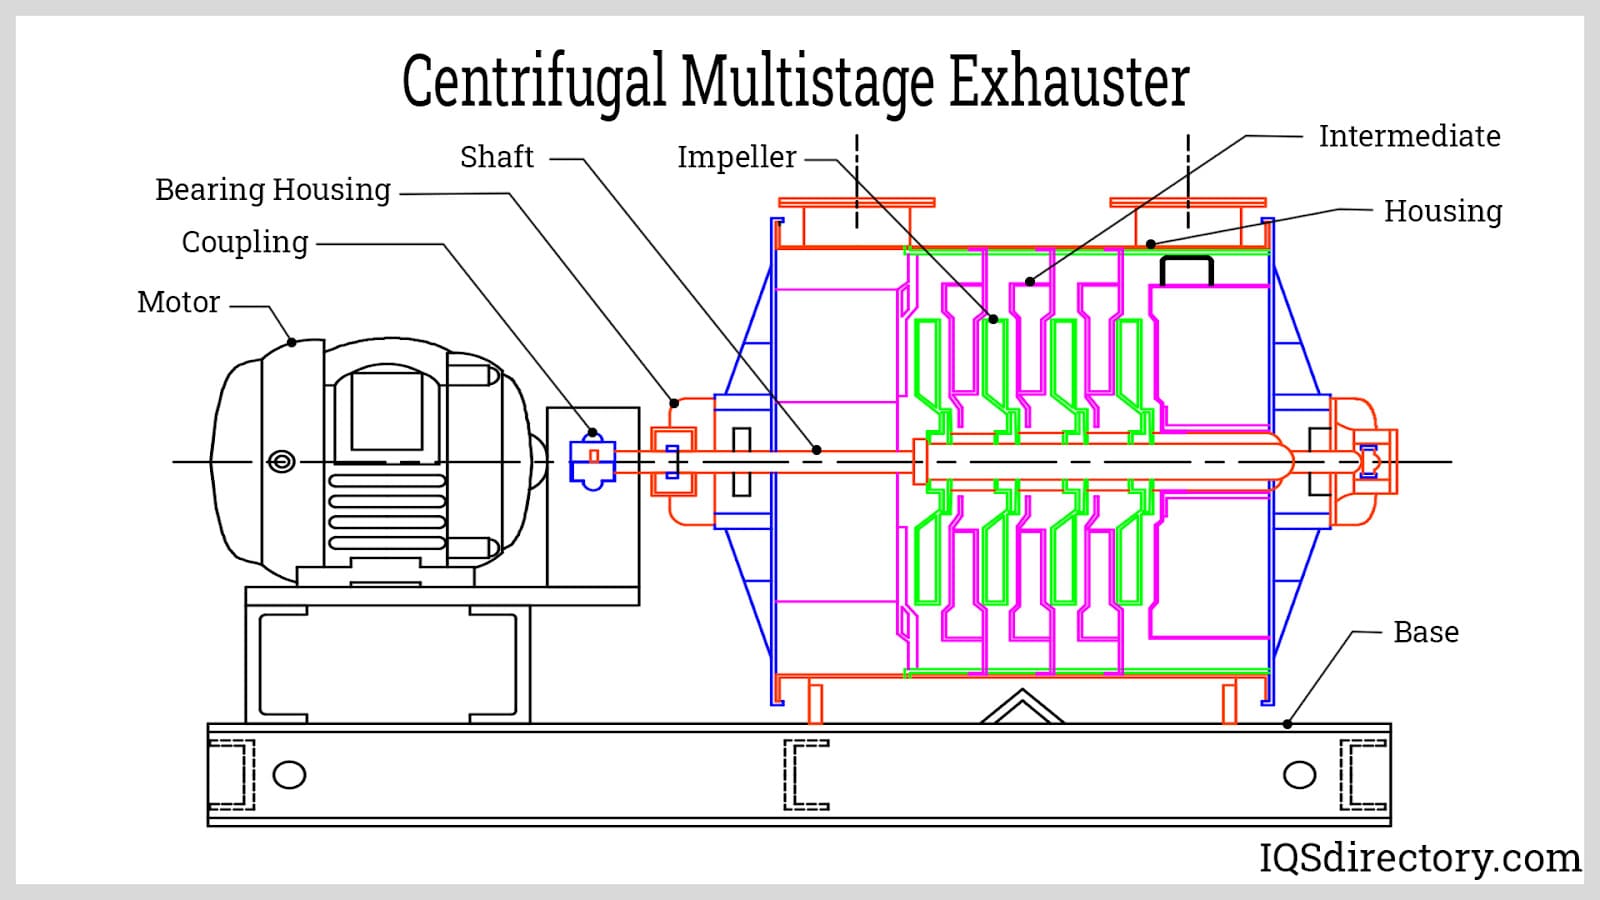 Centrifugal Multistage Exhauster